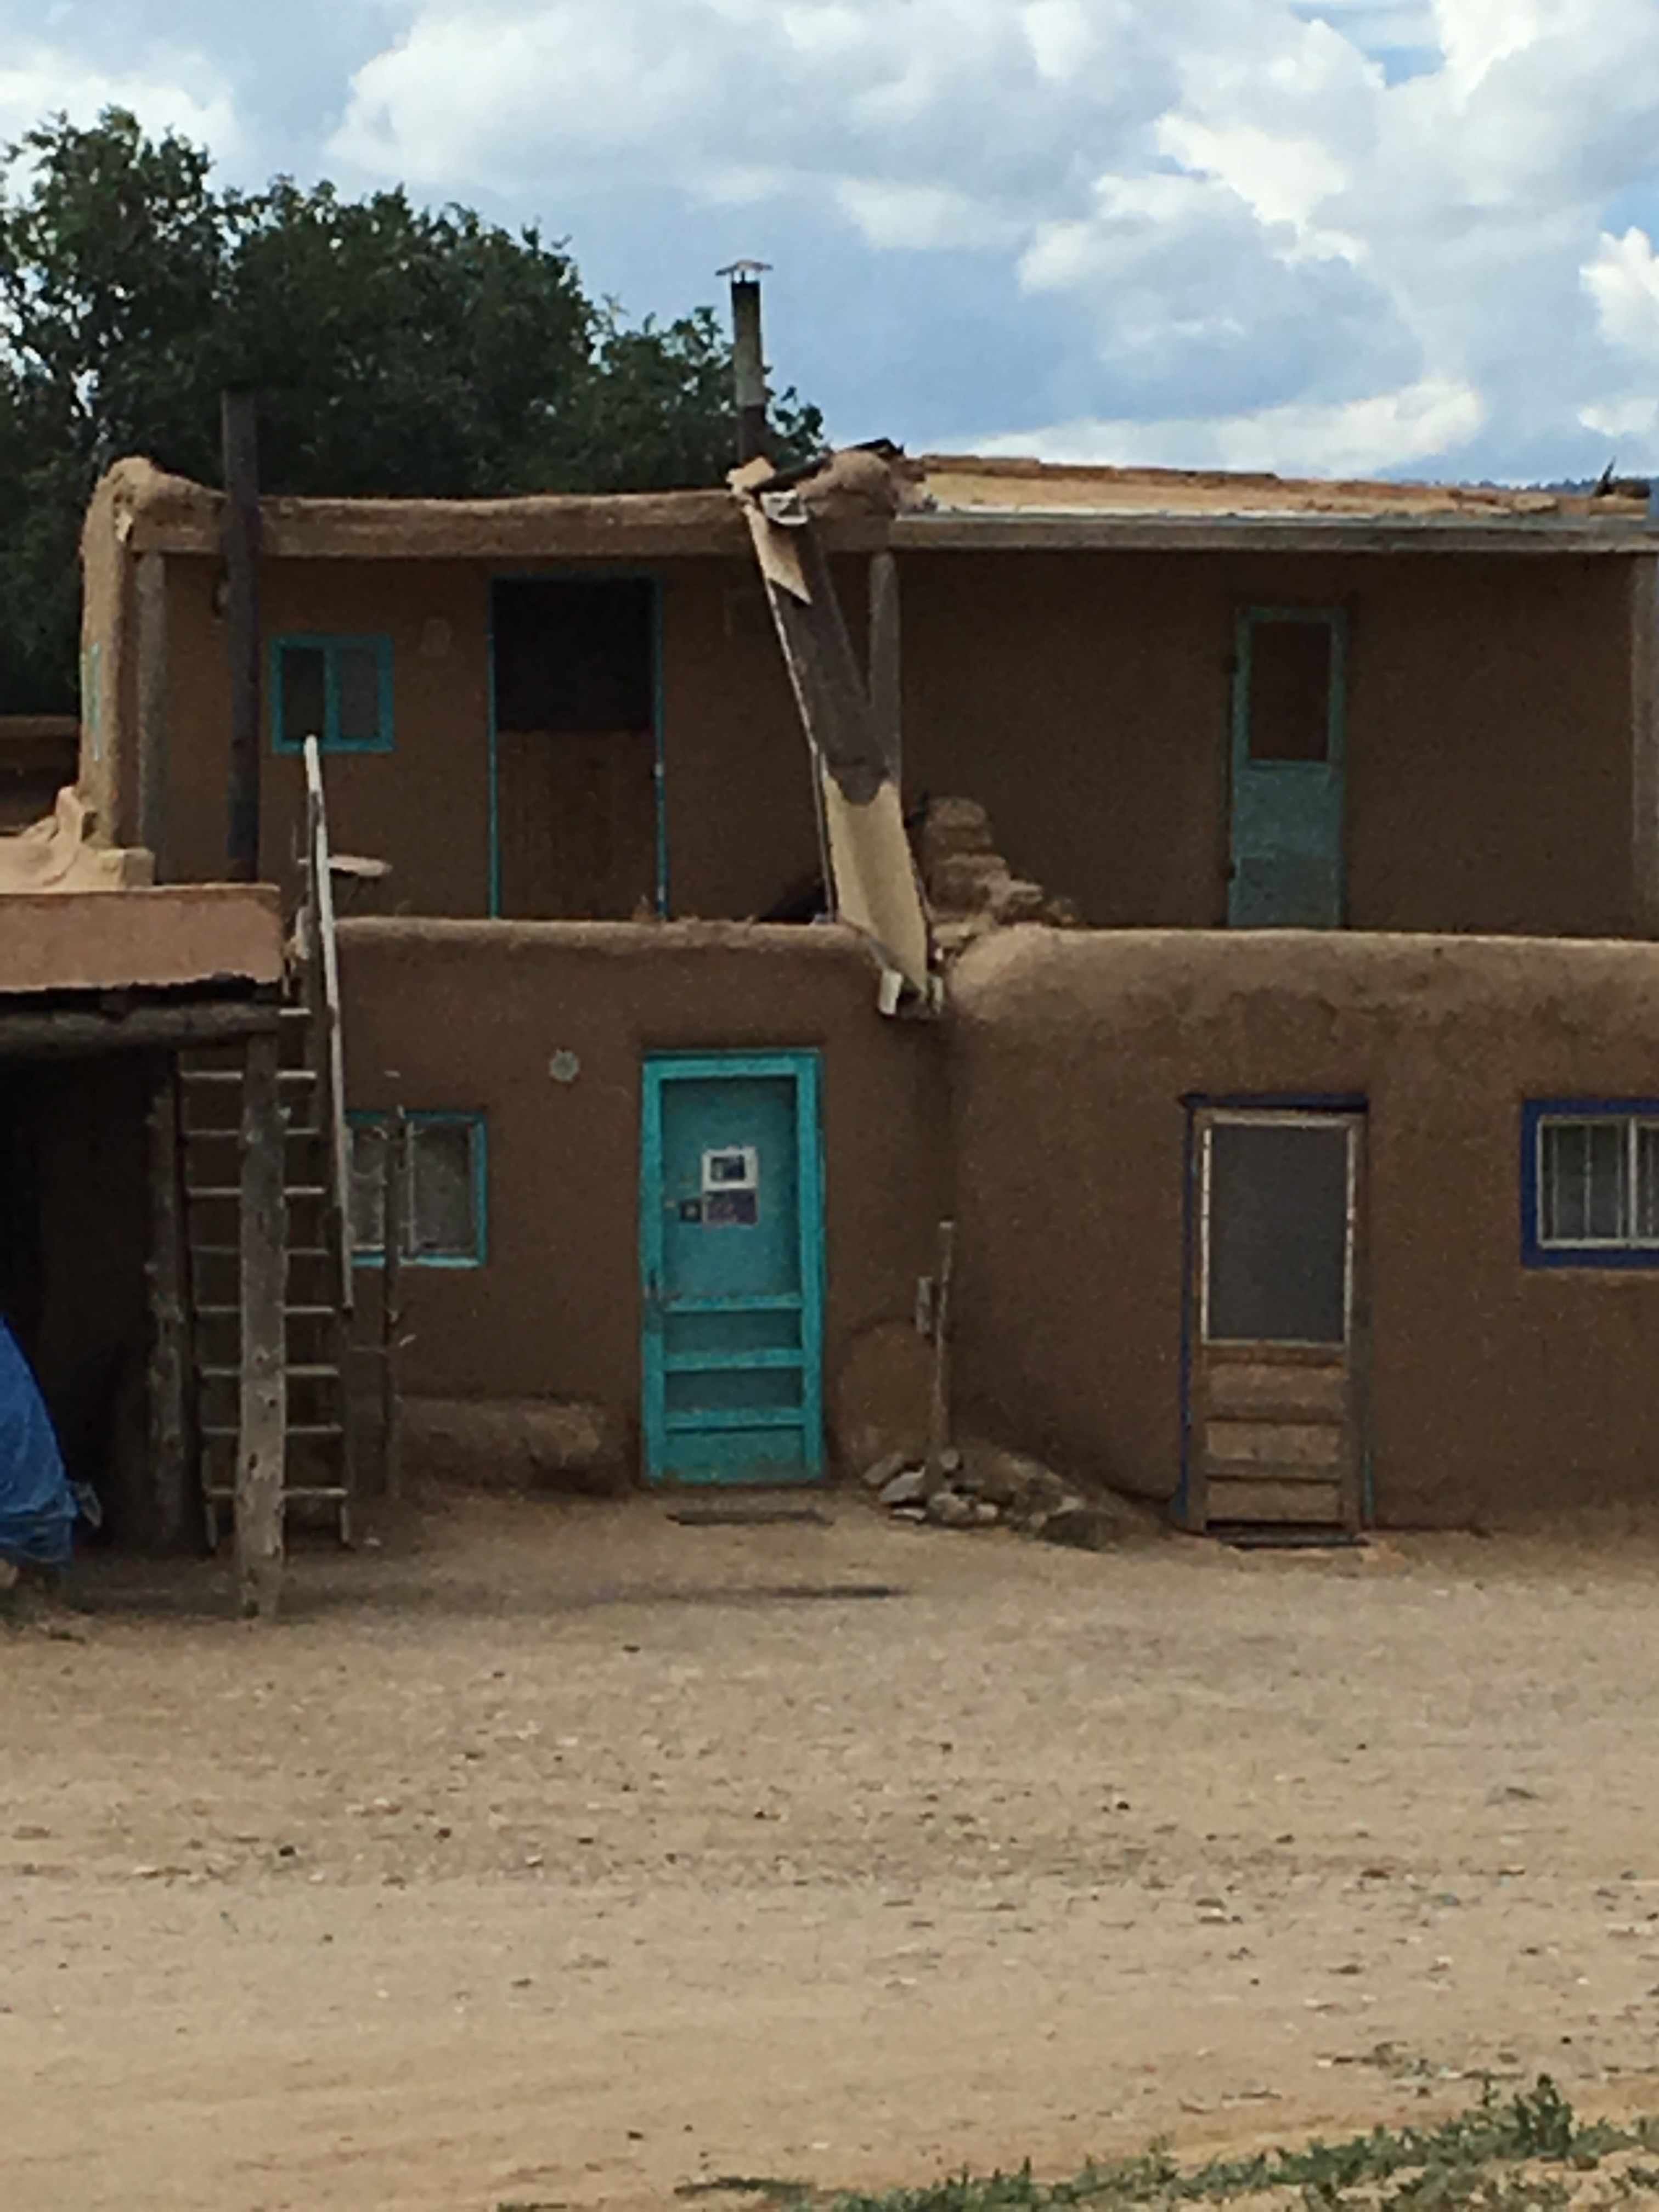 Collective Housing in Taos 1 